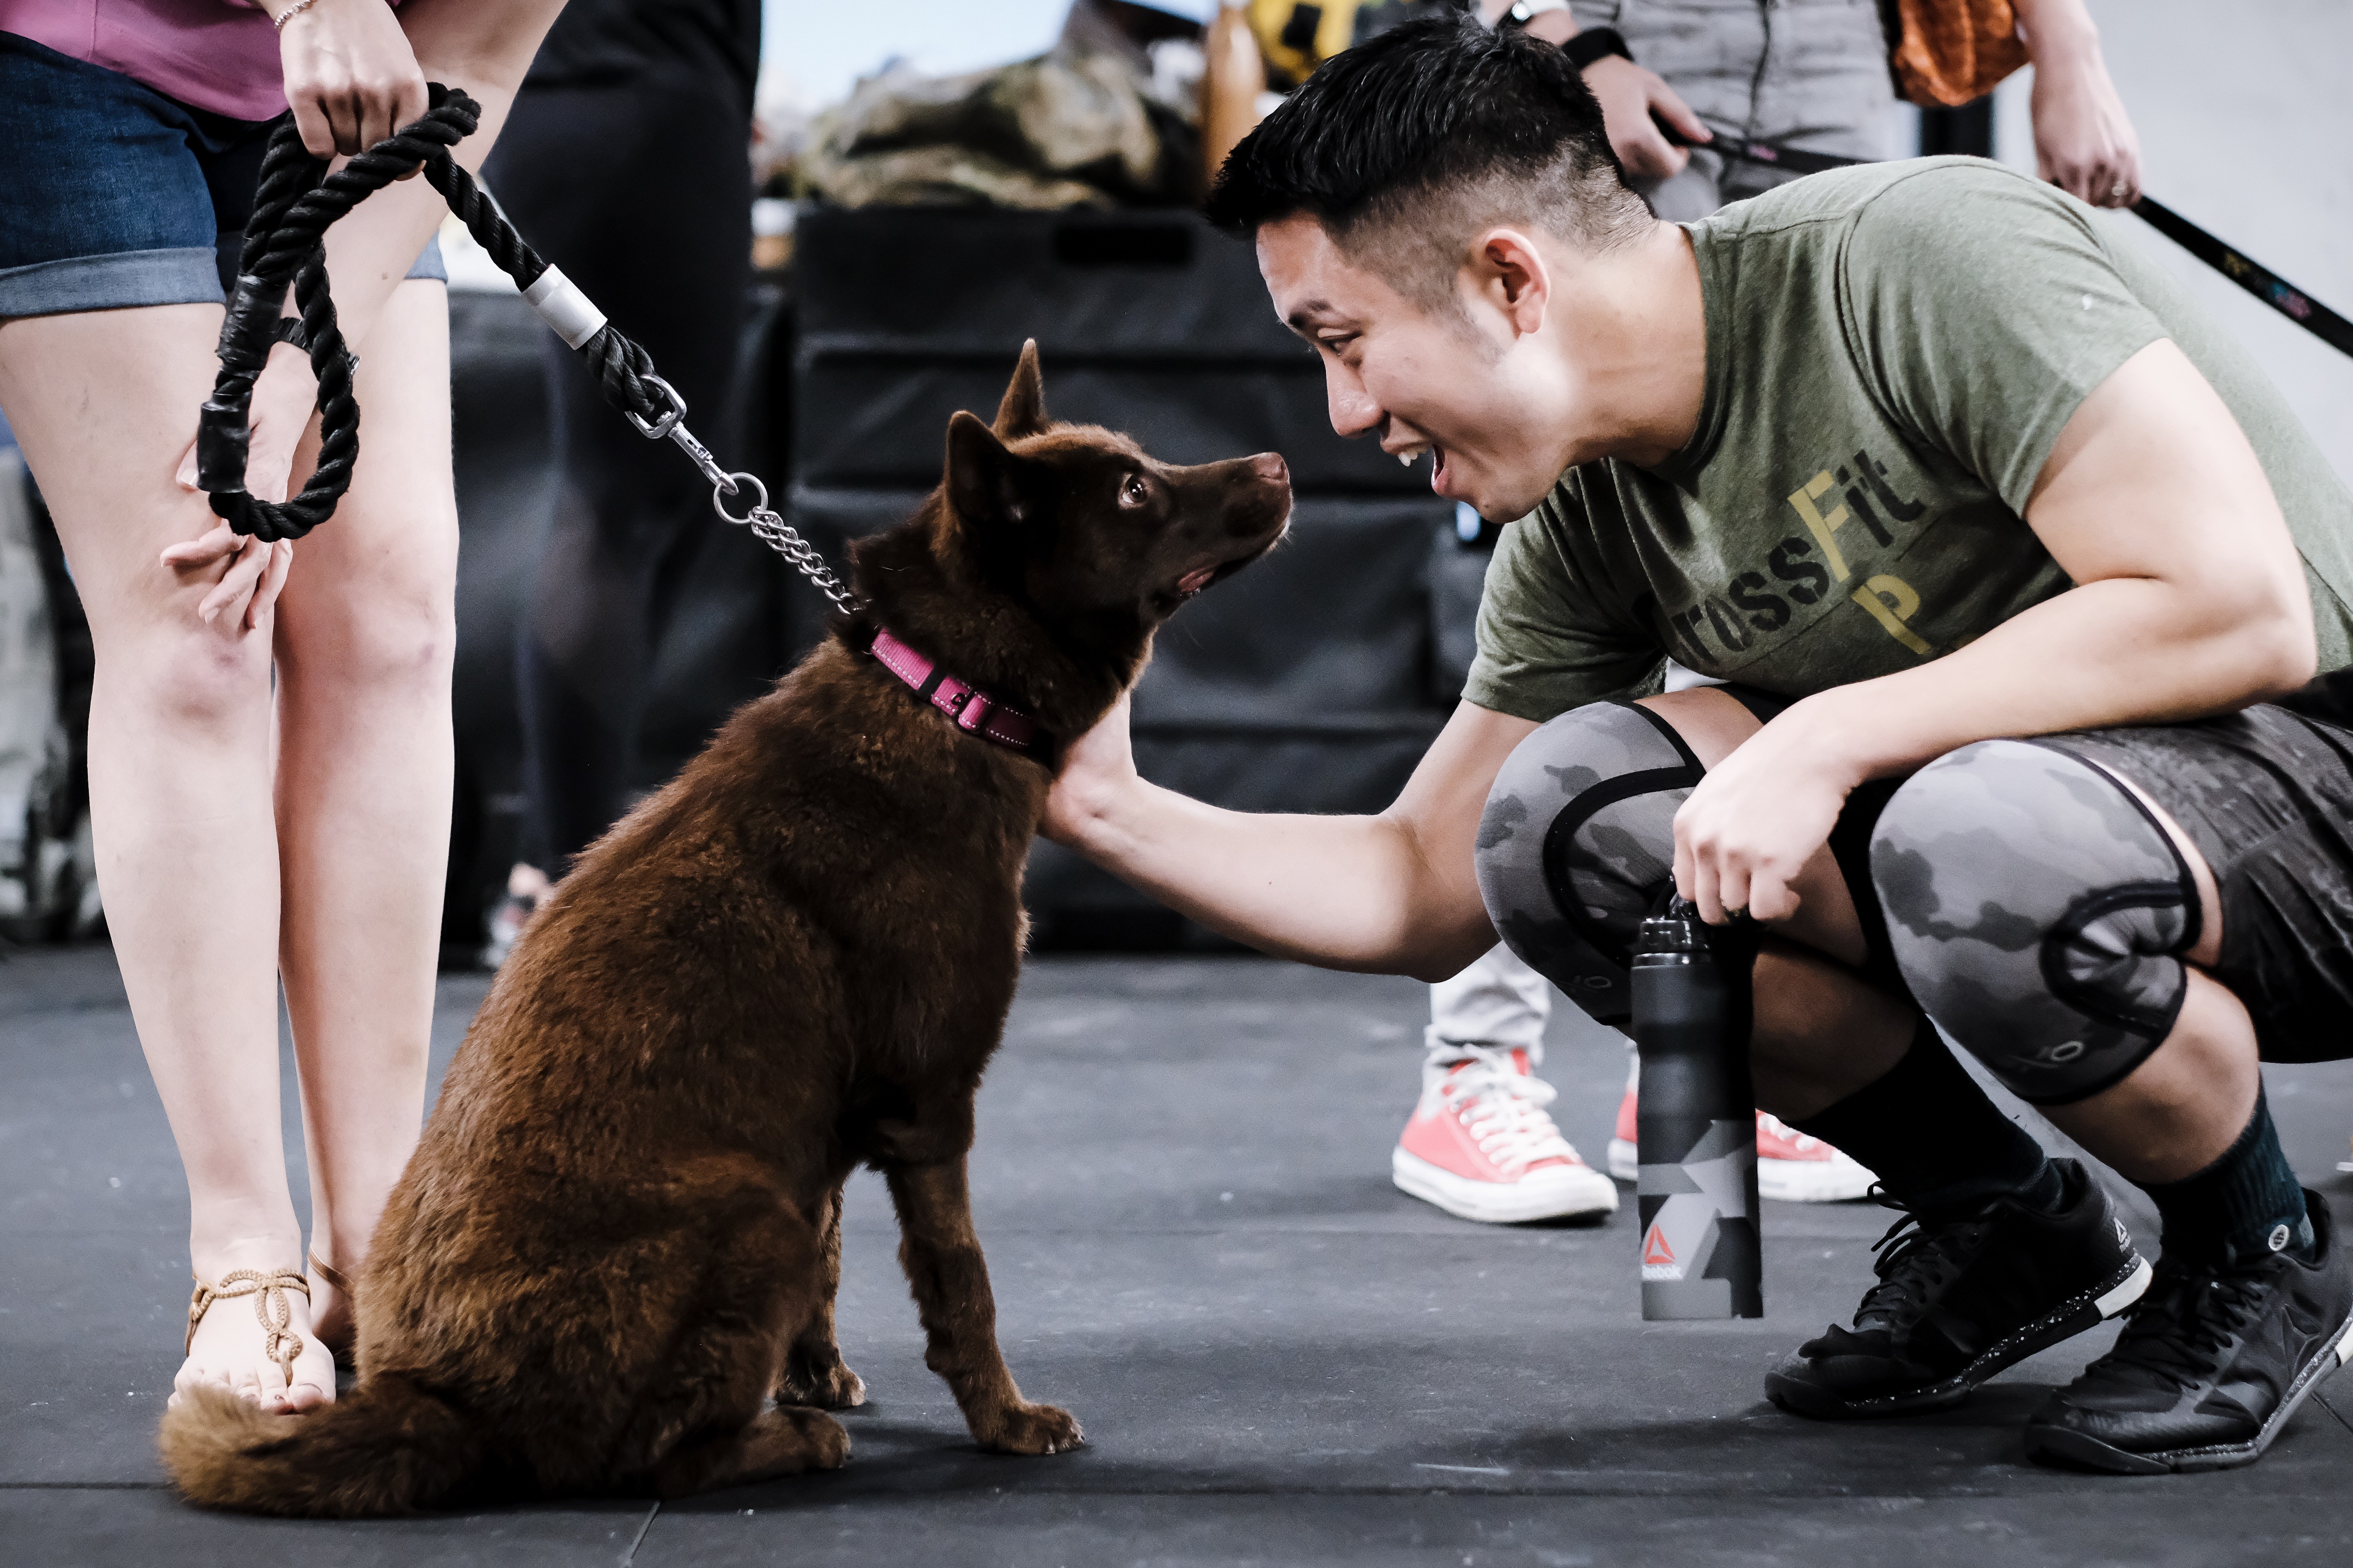 CrossFit Asphodel has an annual charity competition. This year, they raised money for Catherine’s Puppies, which had it’s woof damaged in Typhoon Mangkhut. Photos: CrossFit Asphodel